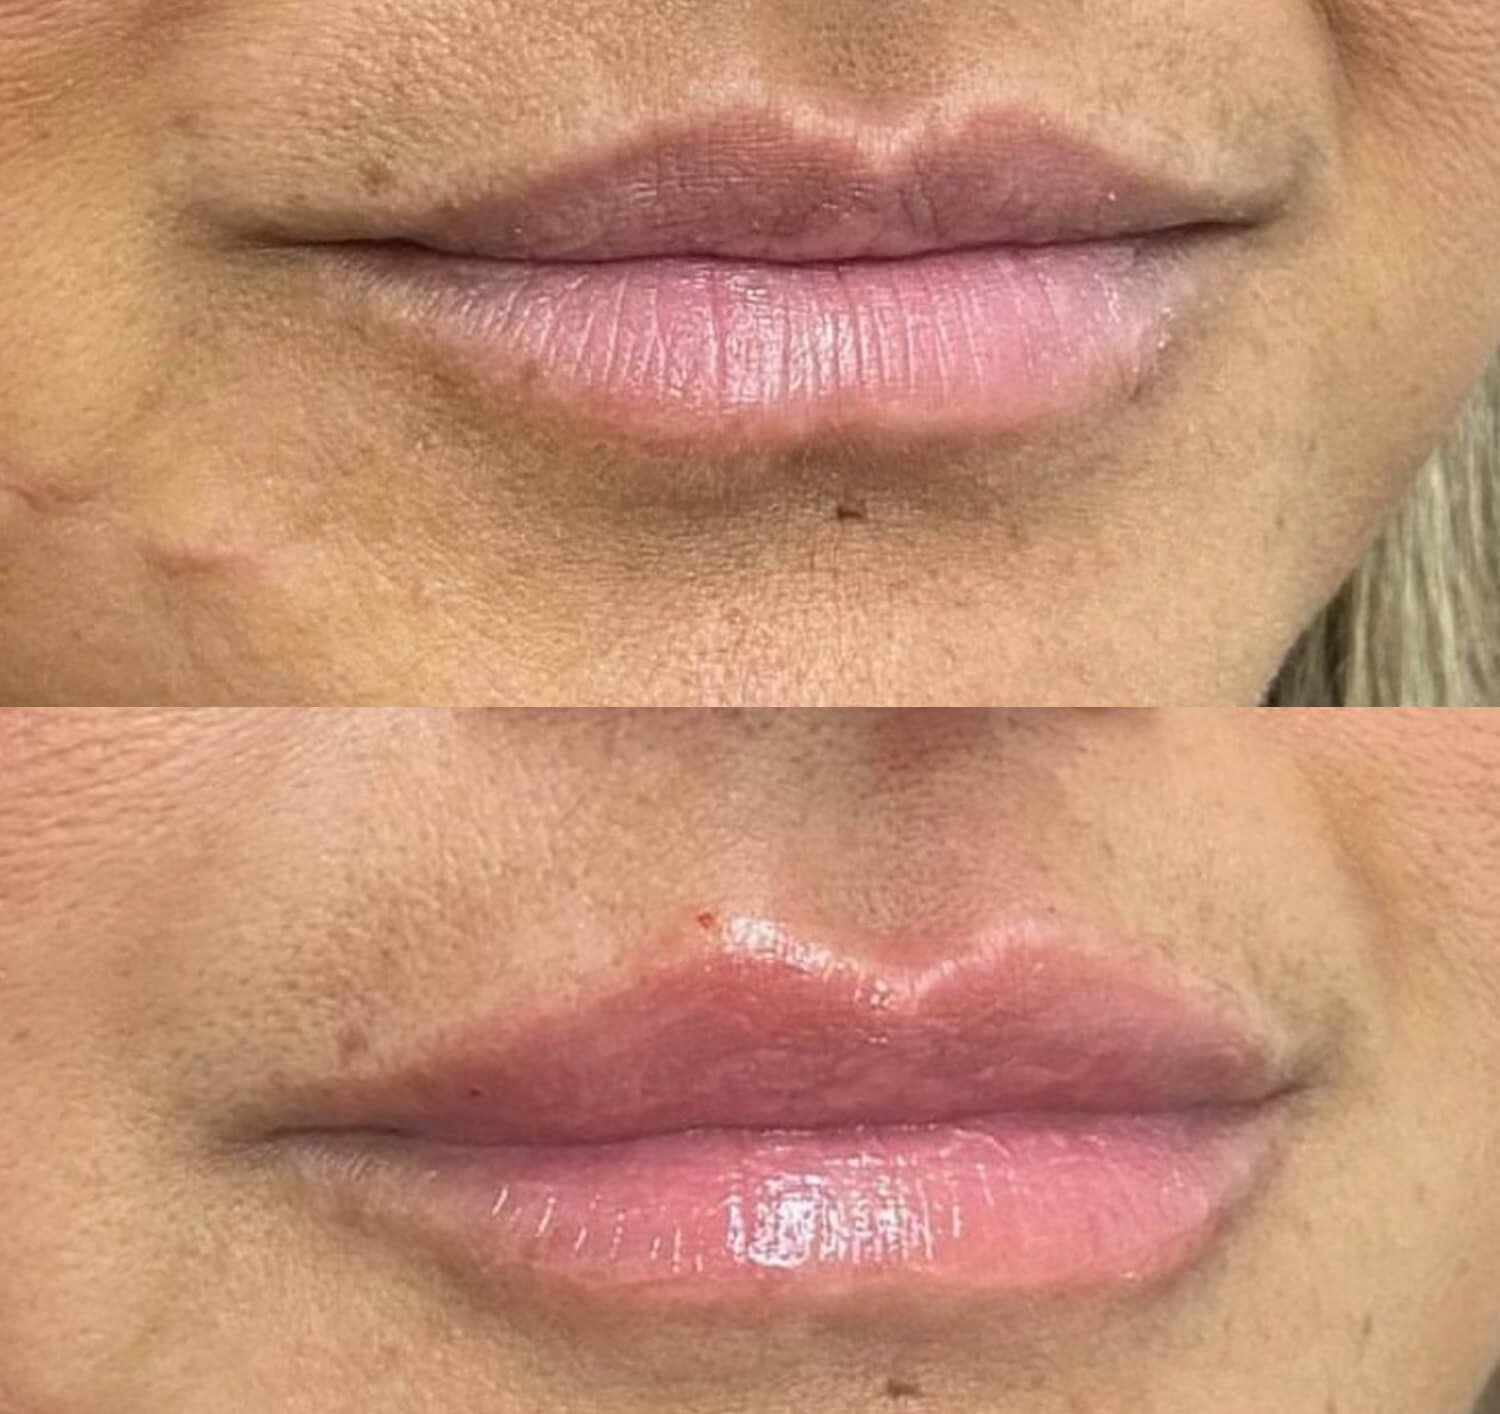 Nicole Dowler lip filler before and after.jpg